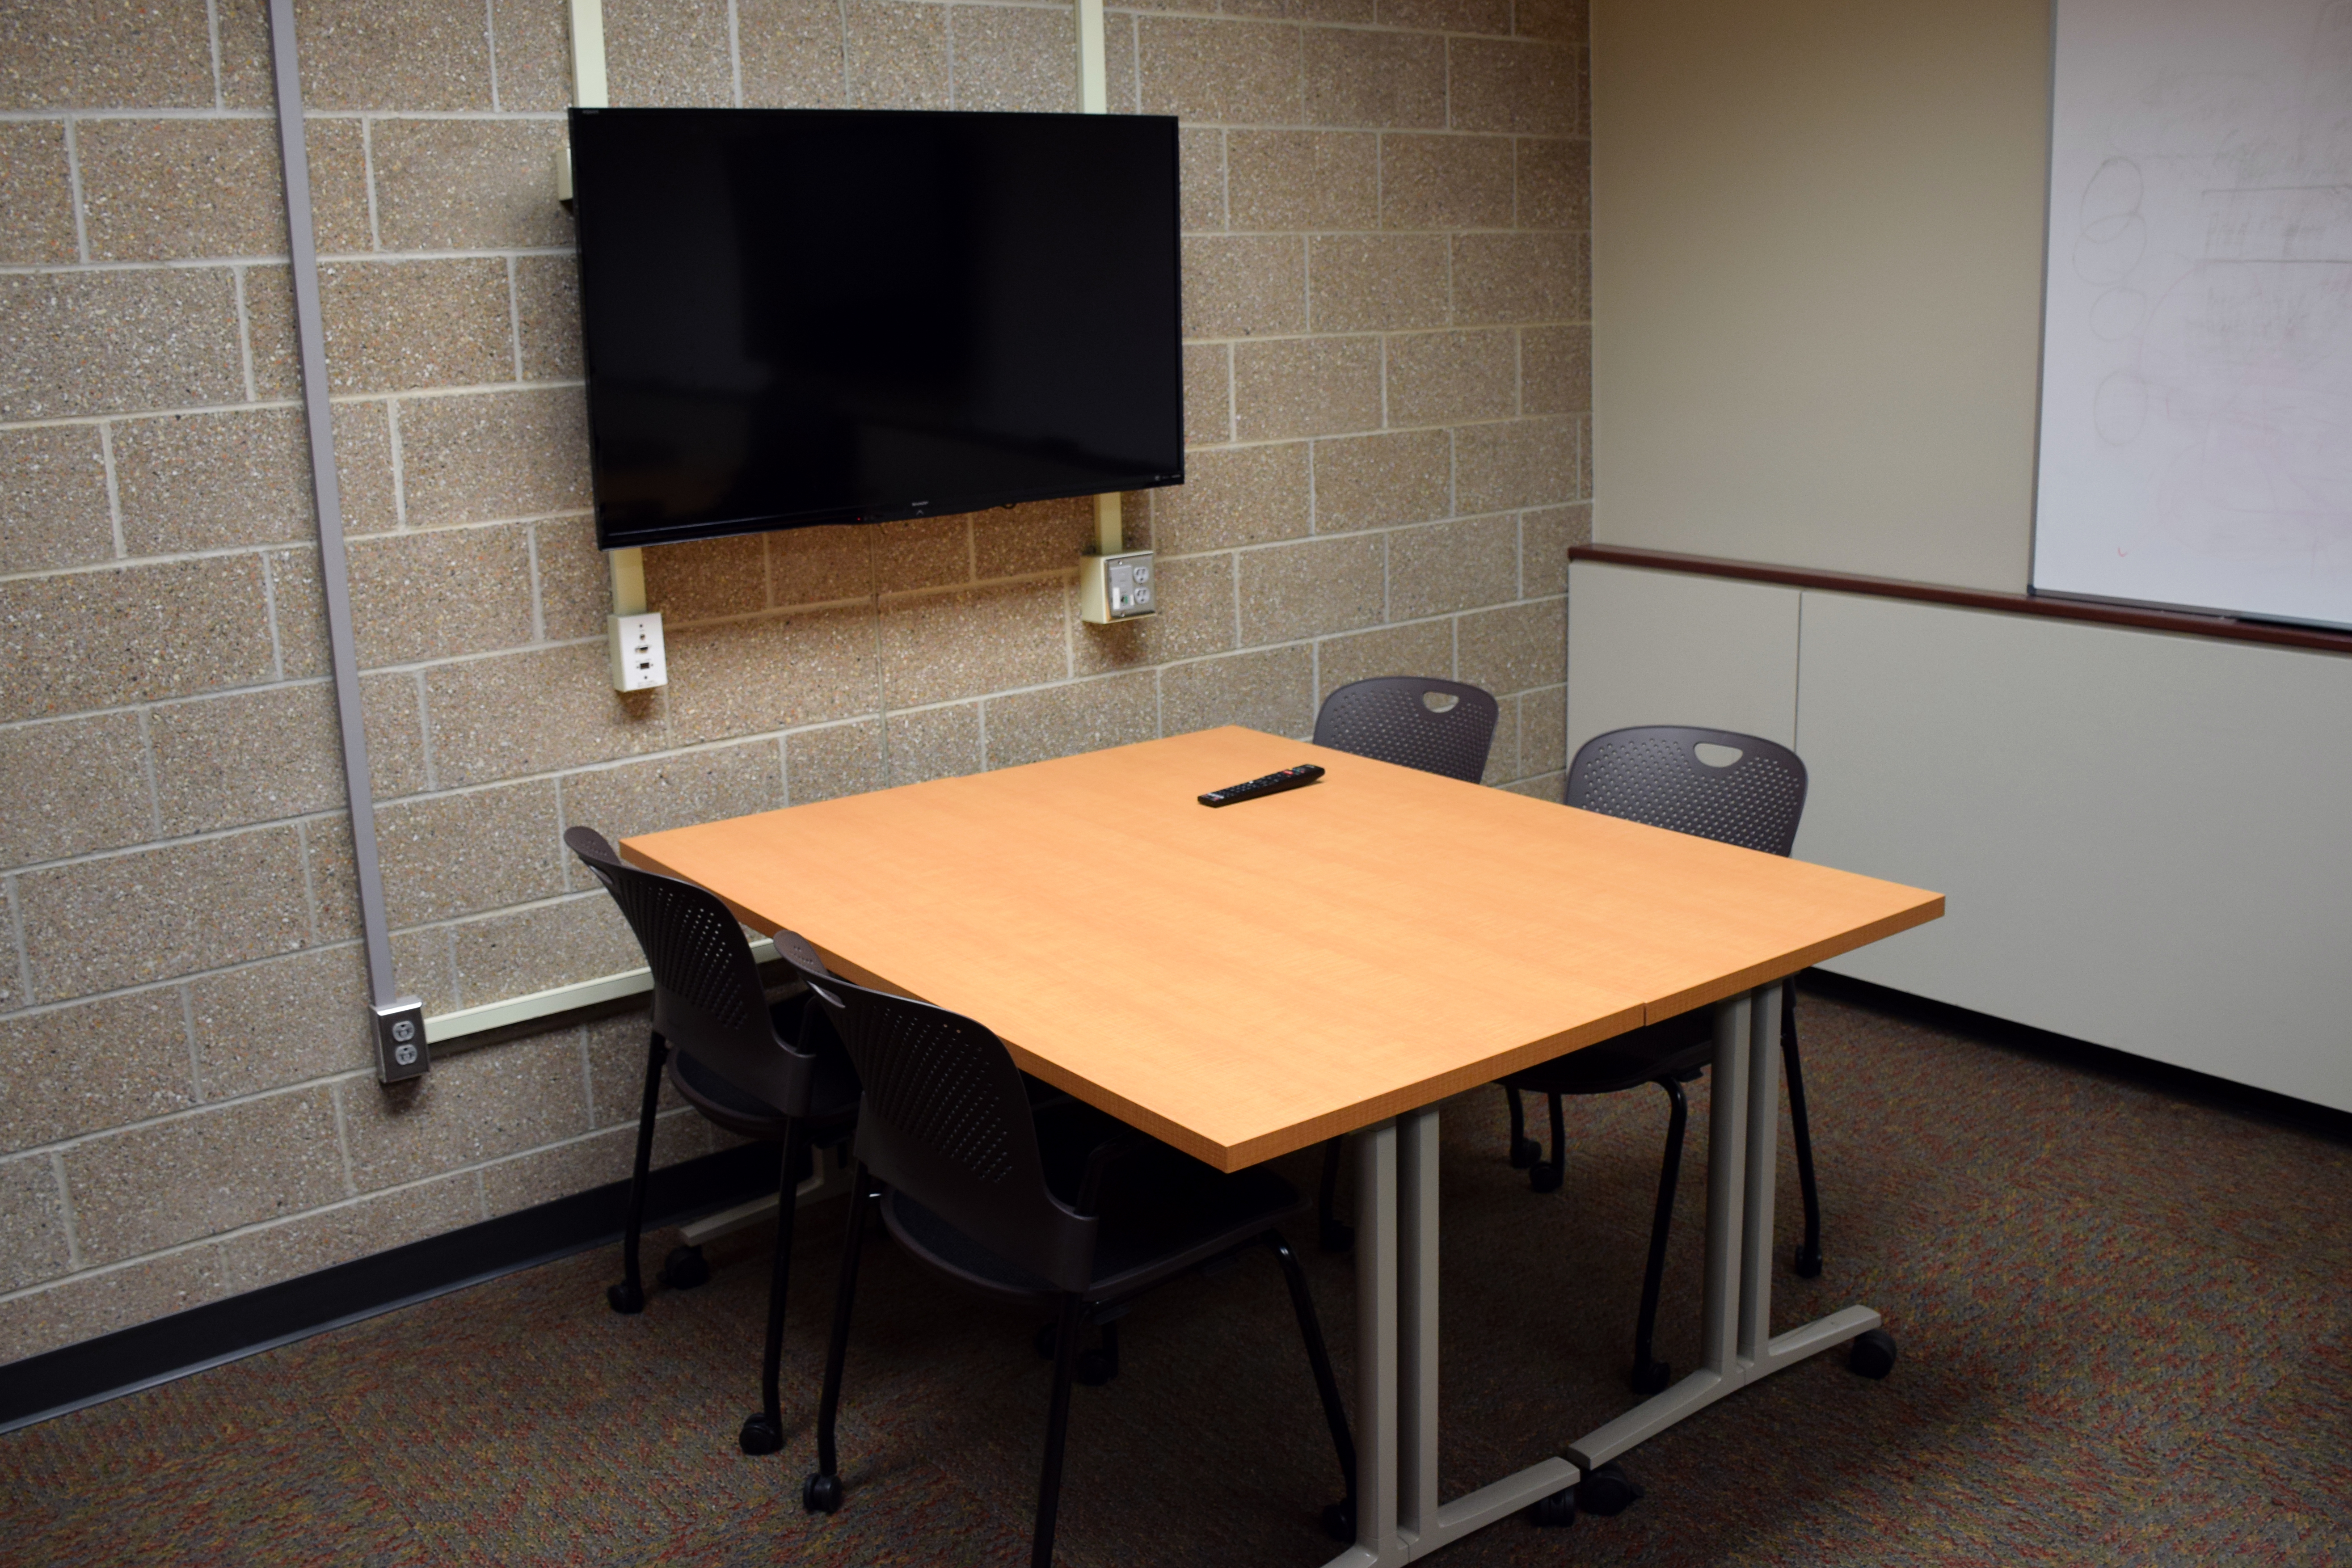 A huddle space in a conference room, with a small 4-person table and computer display